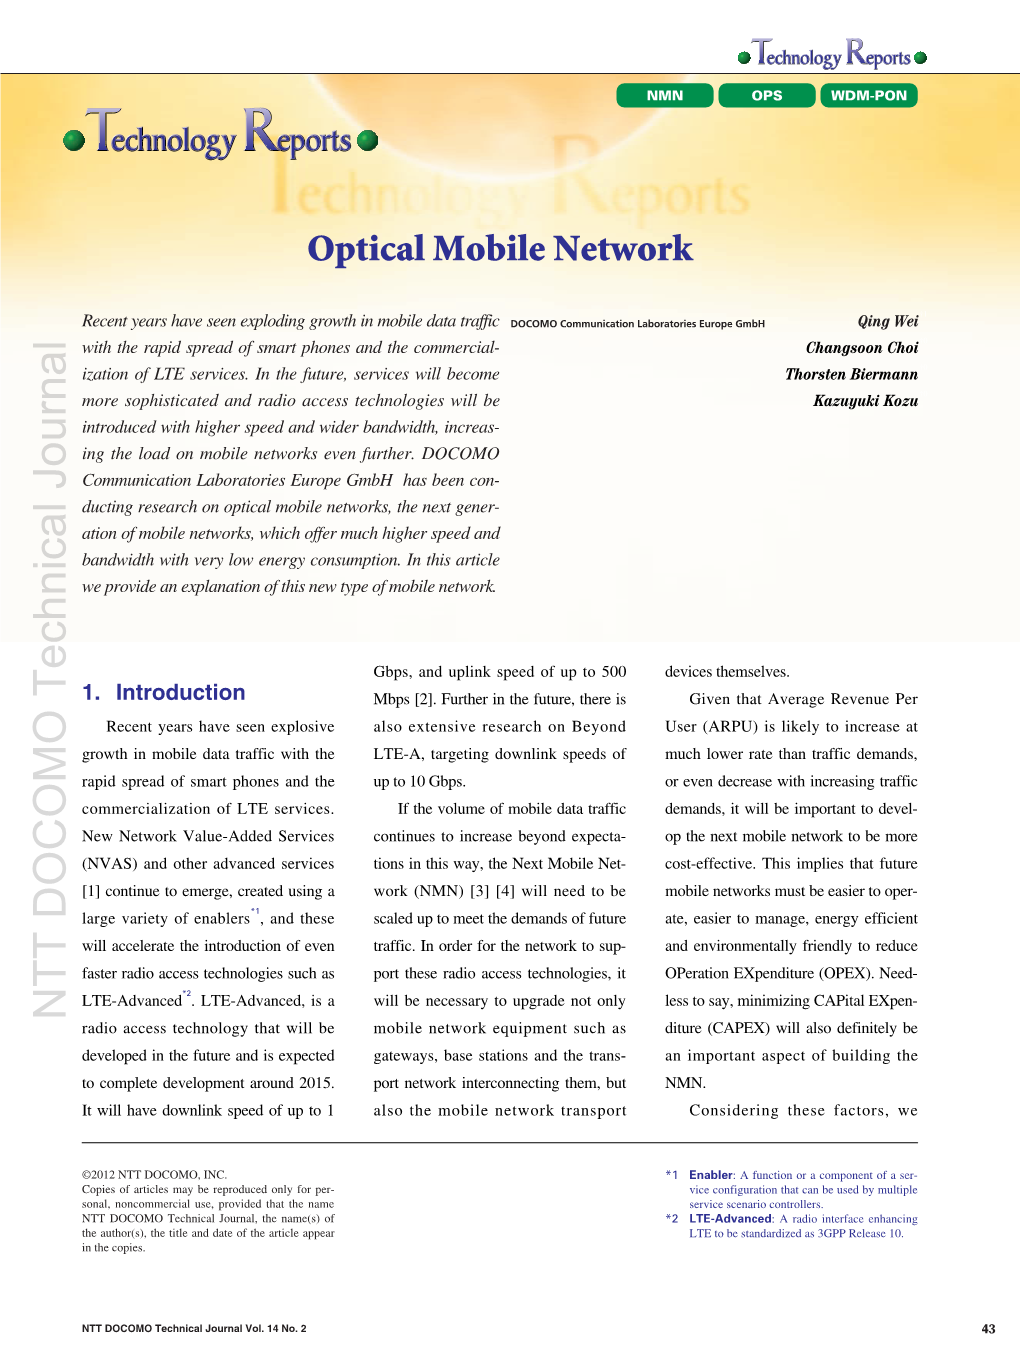 Optical Mobile Network